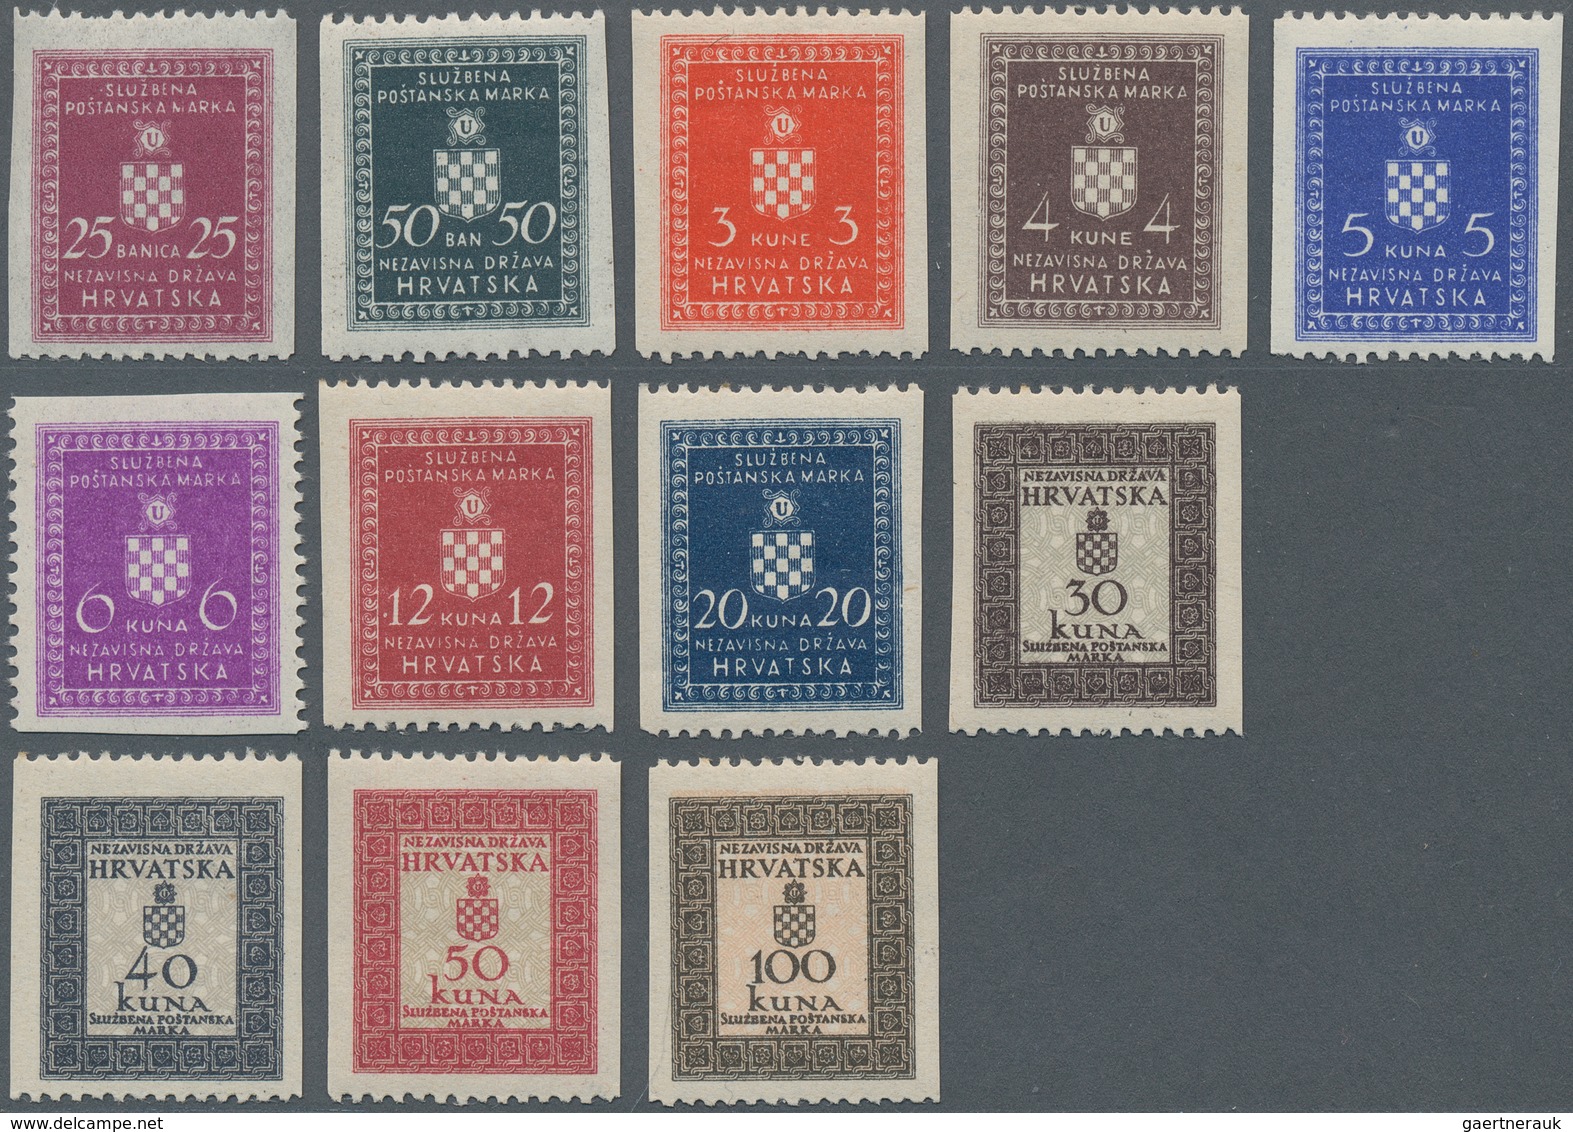 Kroatien - Dienstmarken: 1942/1944. Officials. Slection Of 12 Values, Eleven Of Them Only Perforated - Croatia